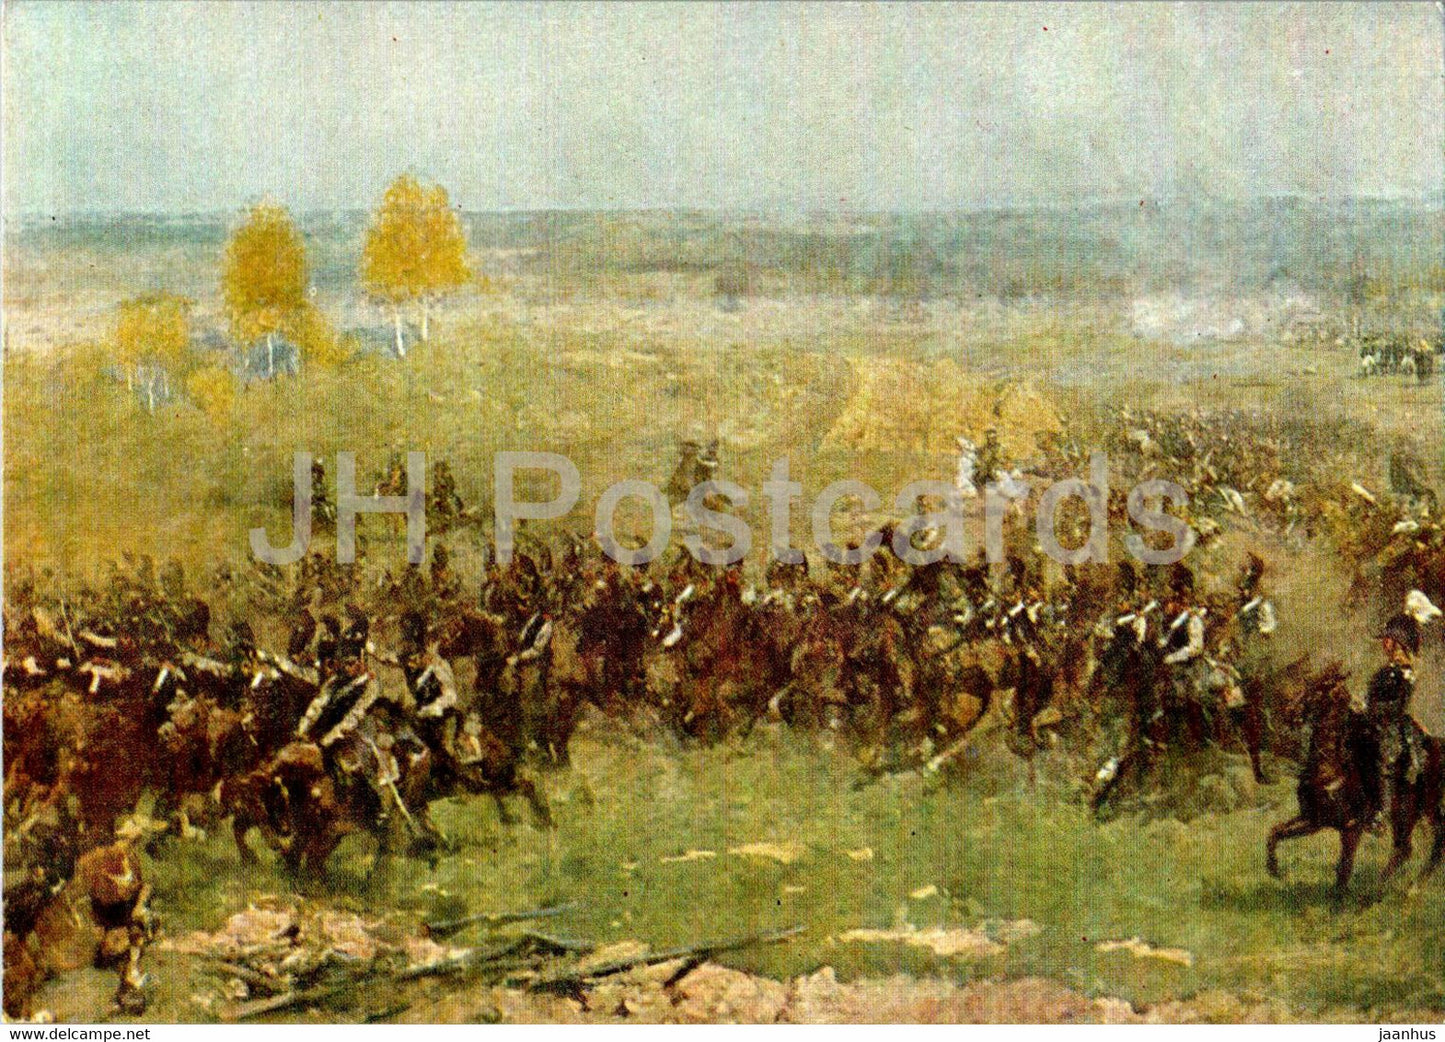 Battle of Borodino - Russian cuirassiers on the attack - panorama - painting by F. Rubo - 1967 - Russia USSR - unused - JH Postcards